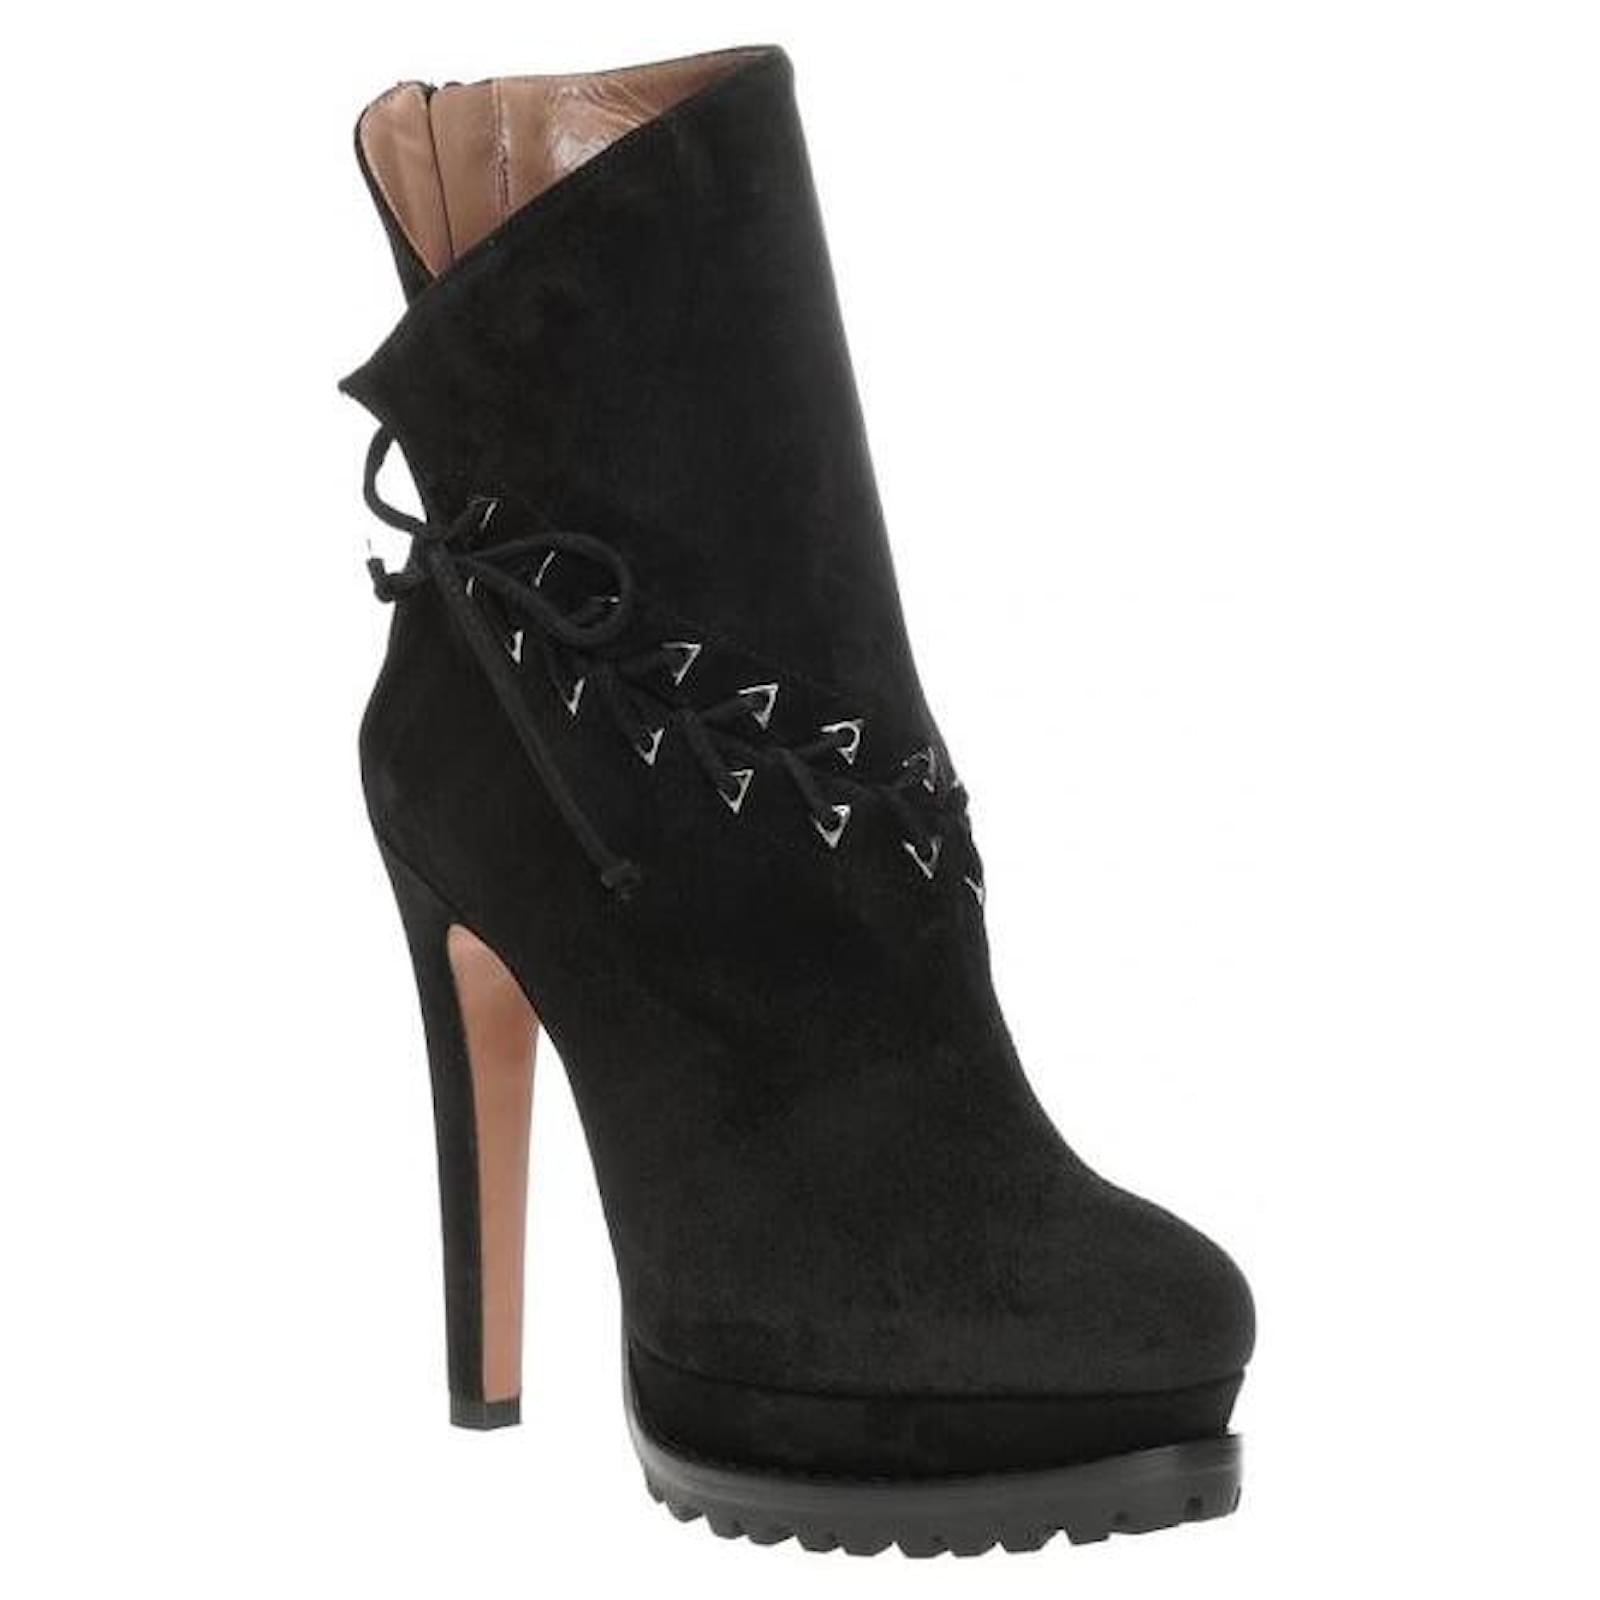 NWT Azzedine Alaïa Shearling-Lined Lace-Up Suede Platform Ankle Boots ...